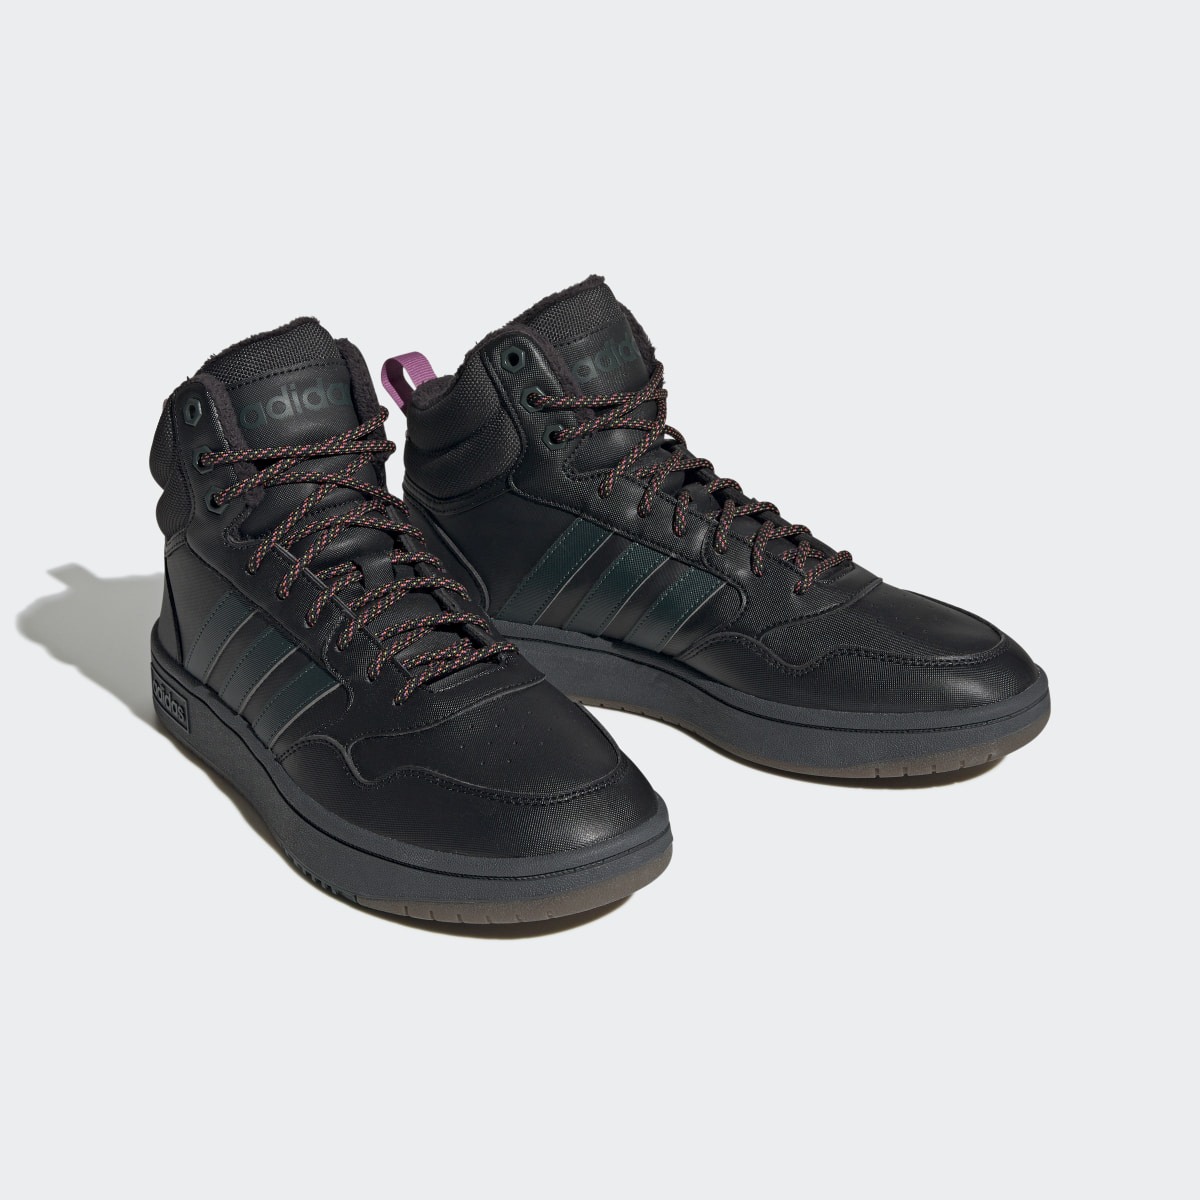 Adidas Hoops 3.0 Mid Lifestyle Basketball Classic Fur Lining Winterized Shoes. 5